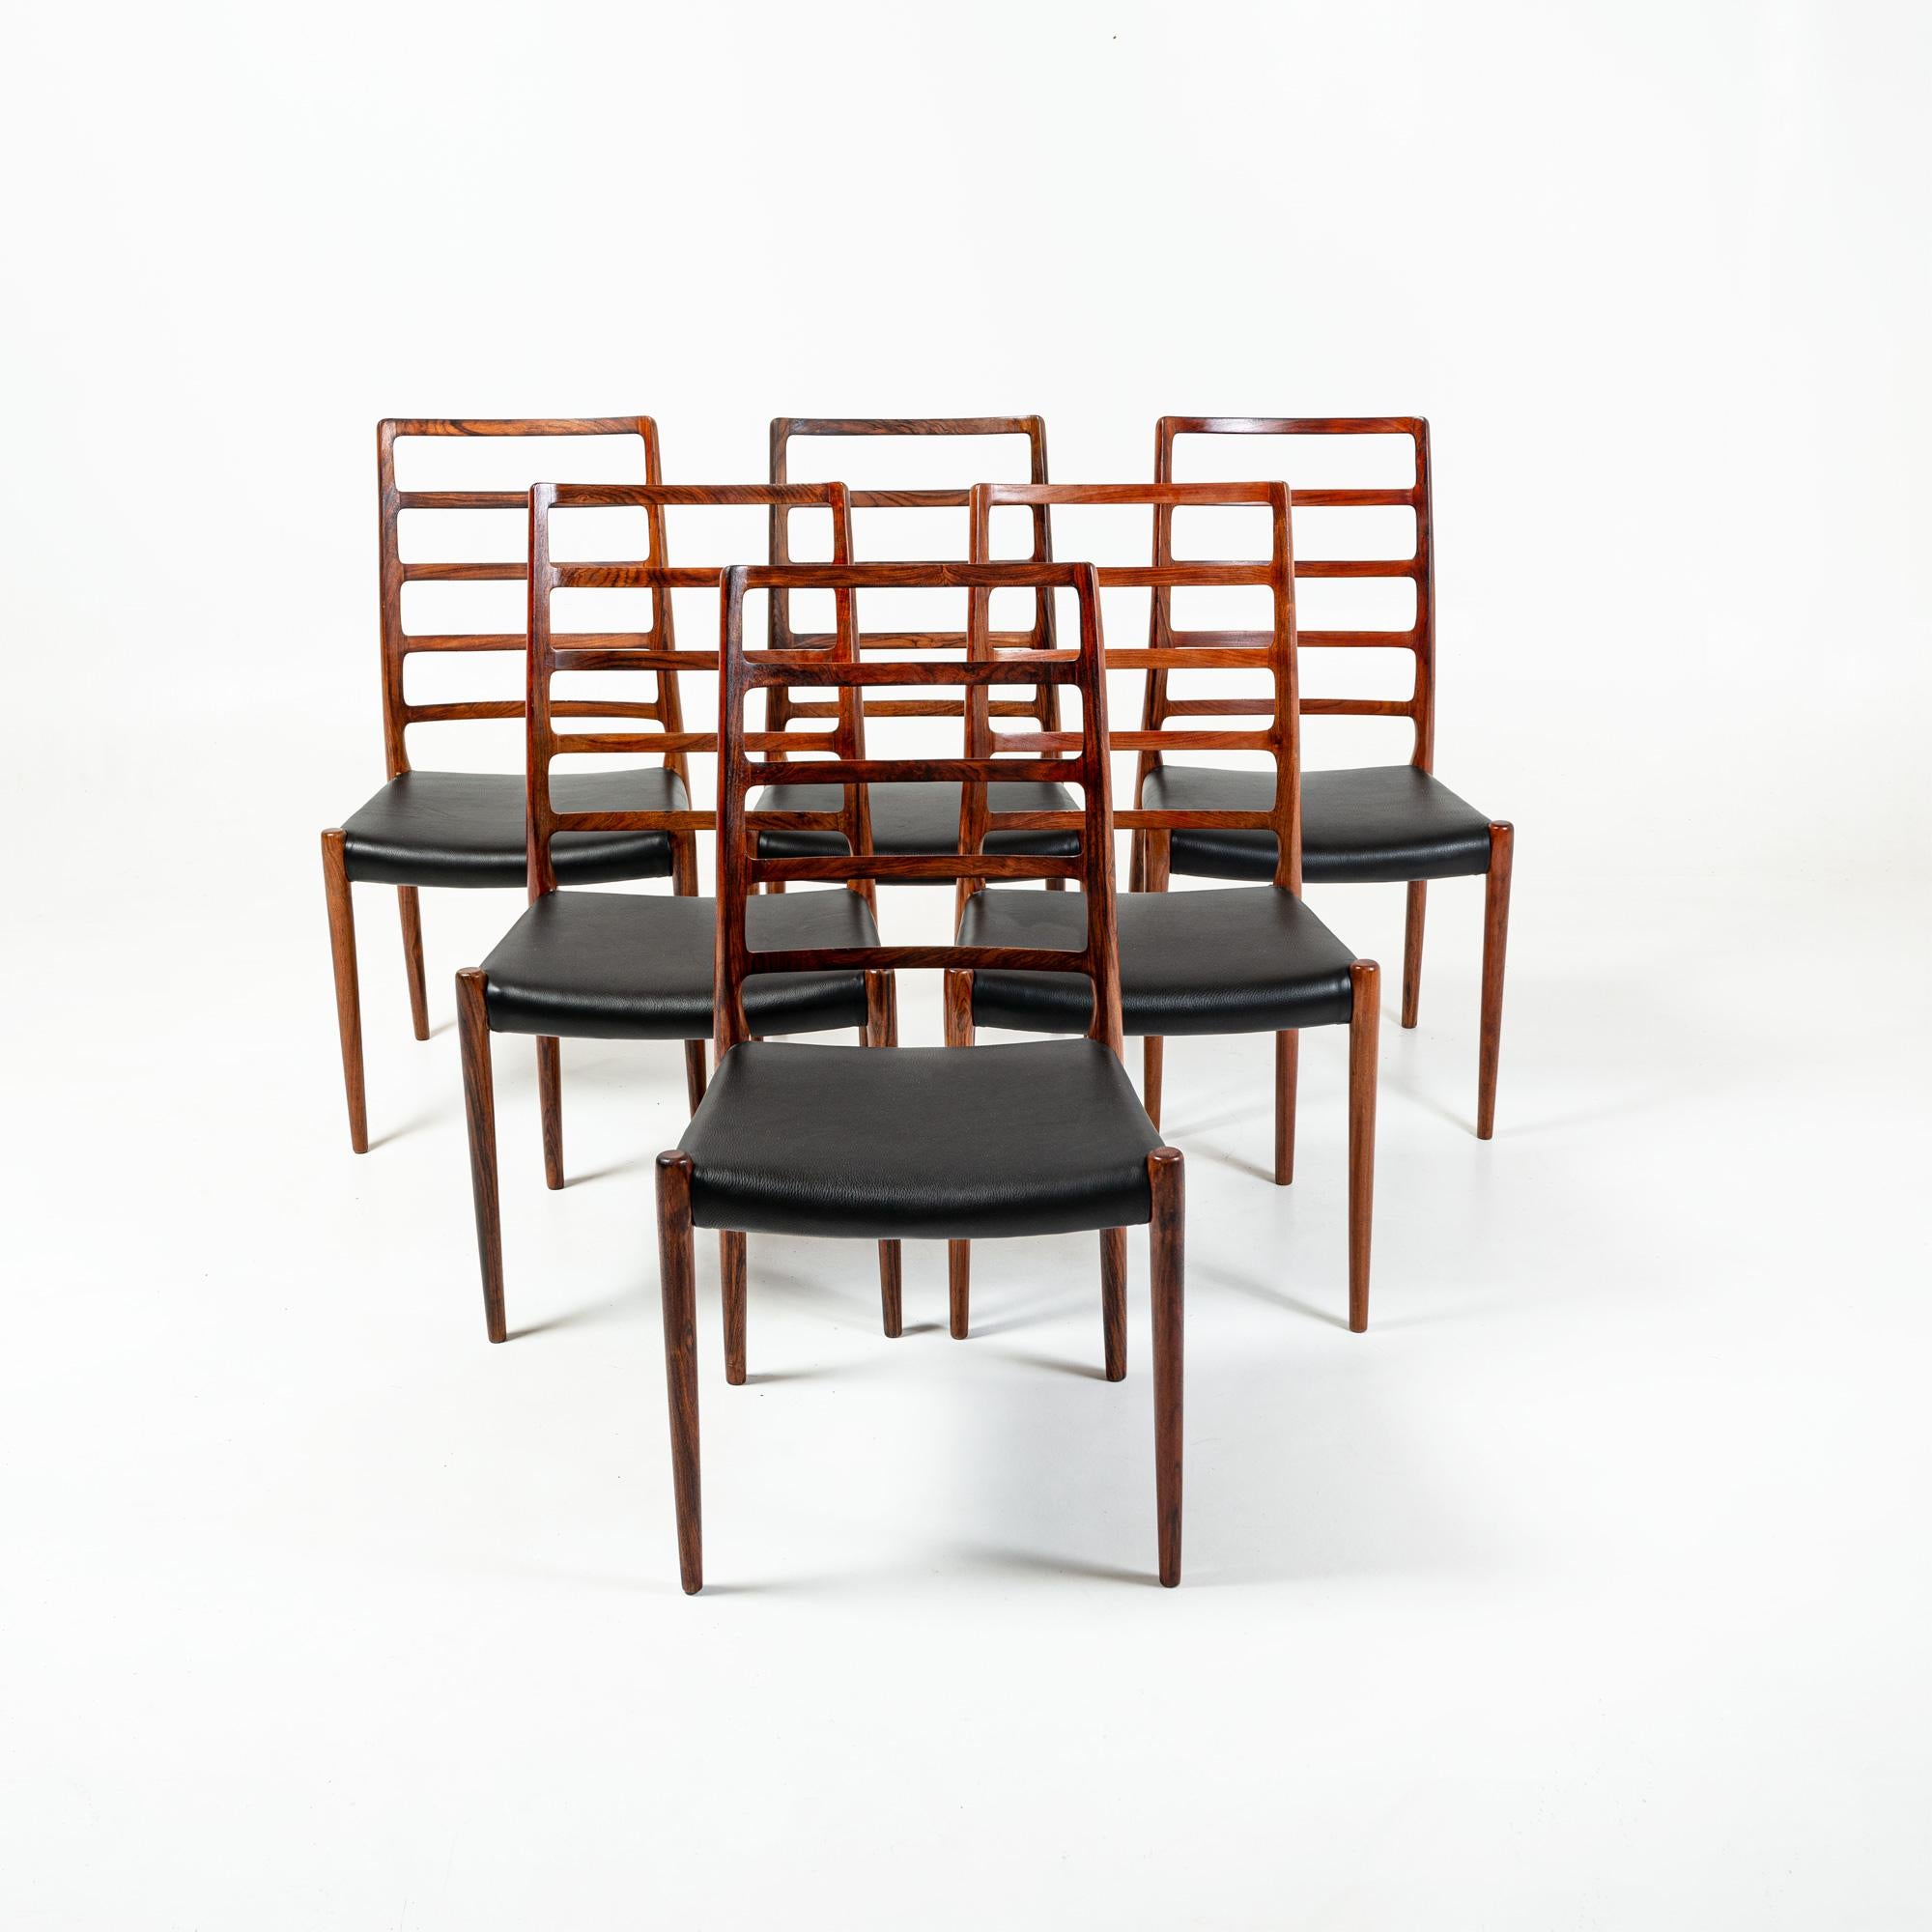 Rare and iconic set of 6 rosewood dining chairs designed by Niels Otto Moller for JL Møller Møbelfabrik in 1954. The set has been completely restored, with all new black leather seat.